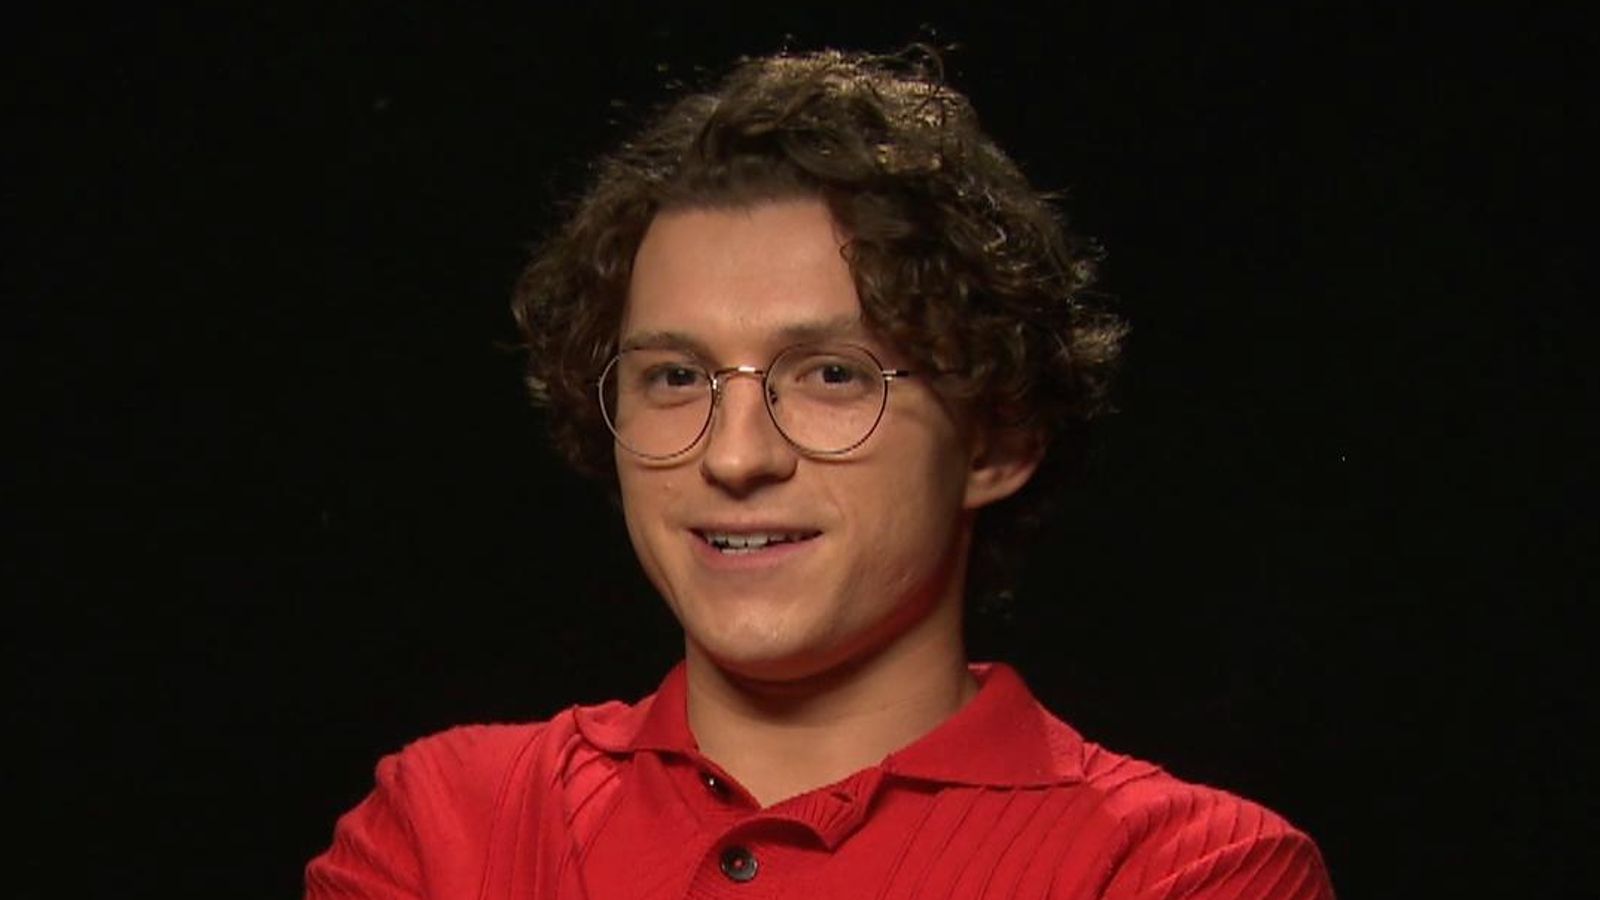 Video: Tom Holland on pressure of getting new Spider-Man film right ...